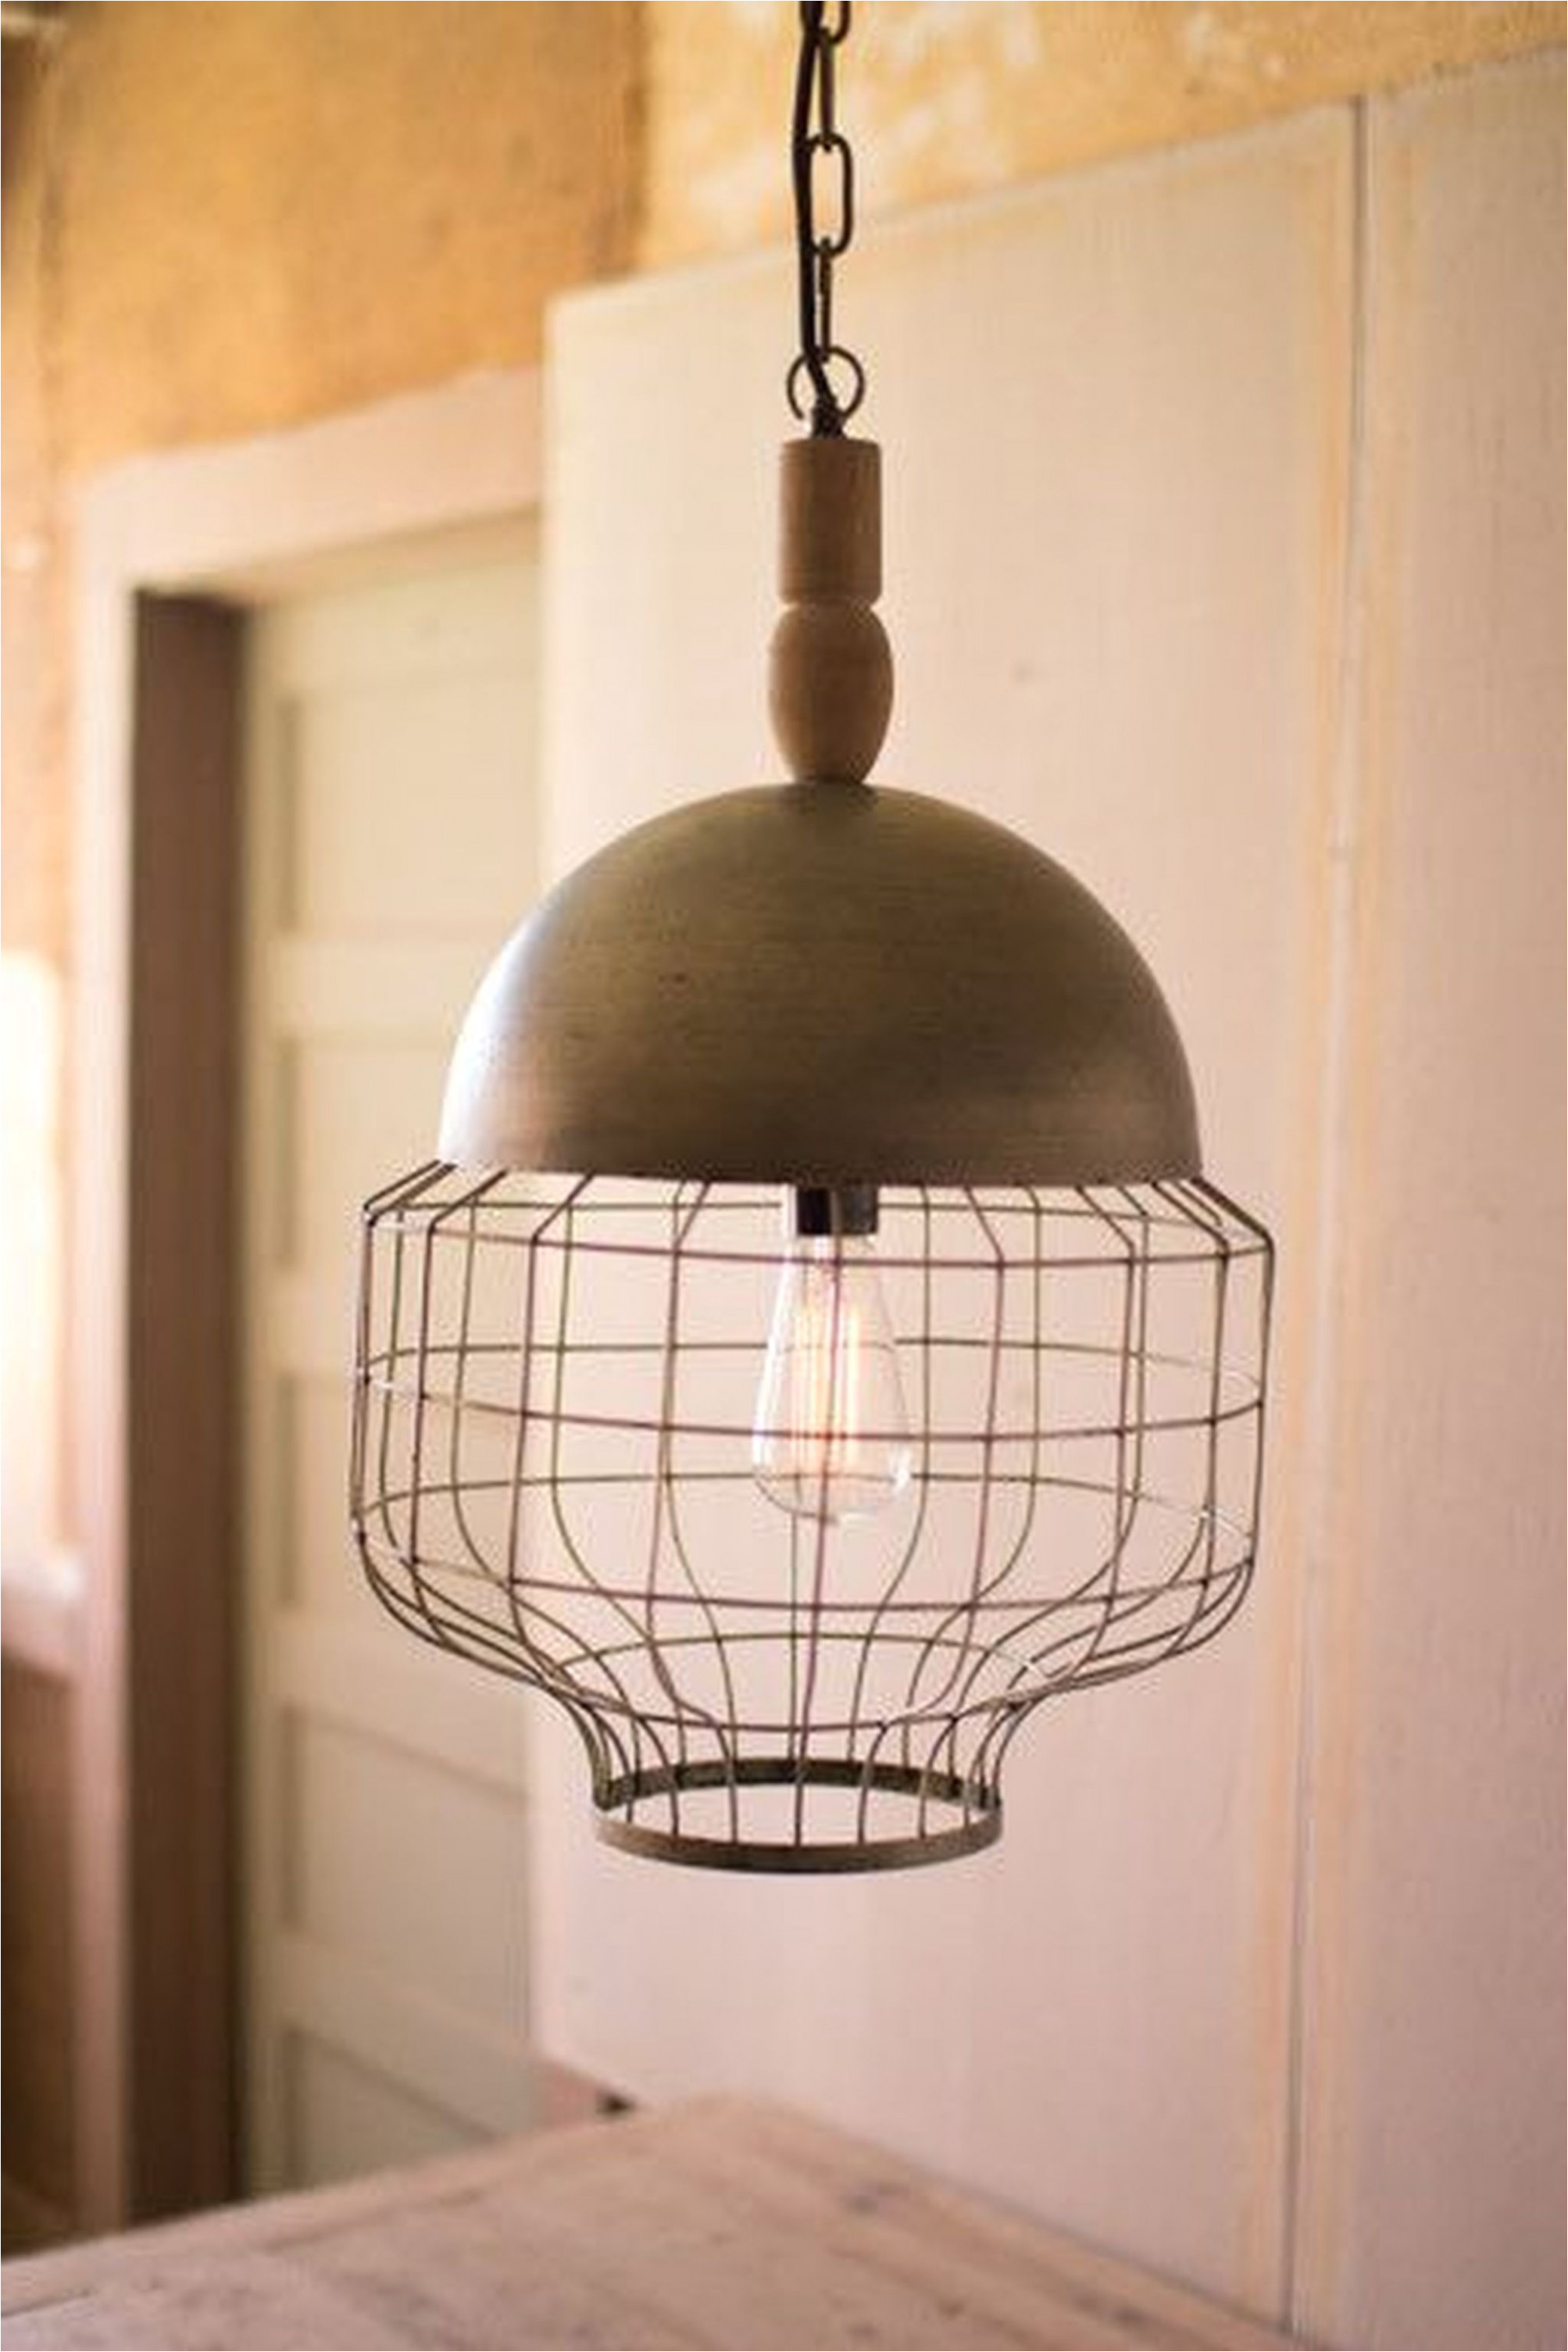 Swag Lamps that Plug In Ikea Gorgeous Ikea Pendant Lightikea Pendant Light Luxury Pendant Light